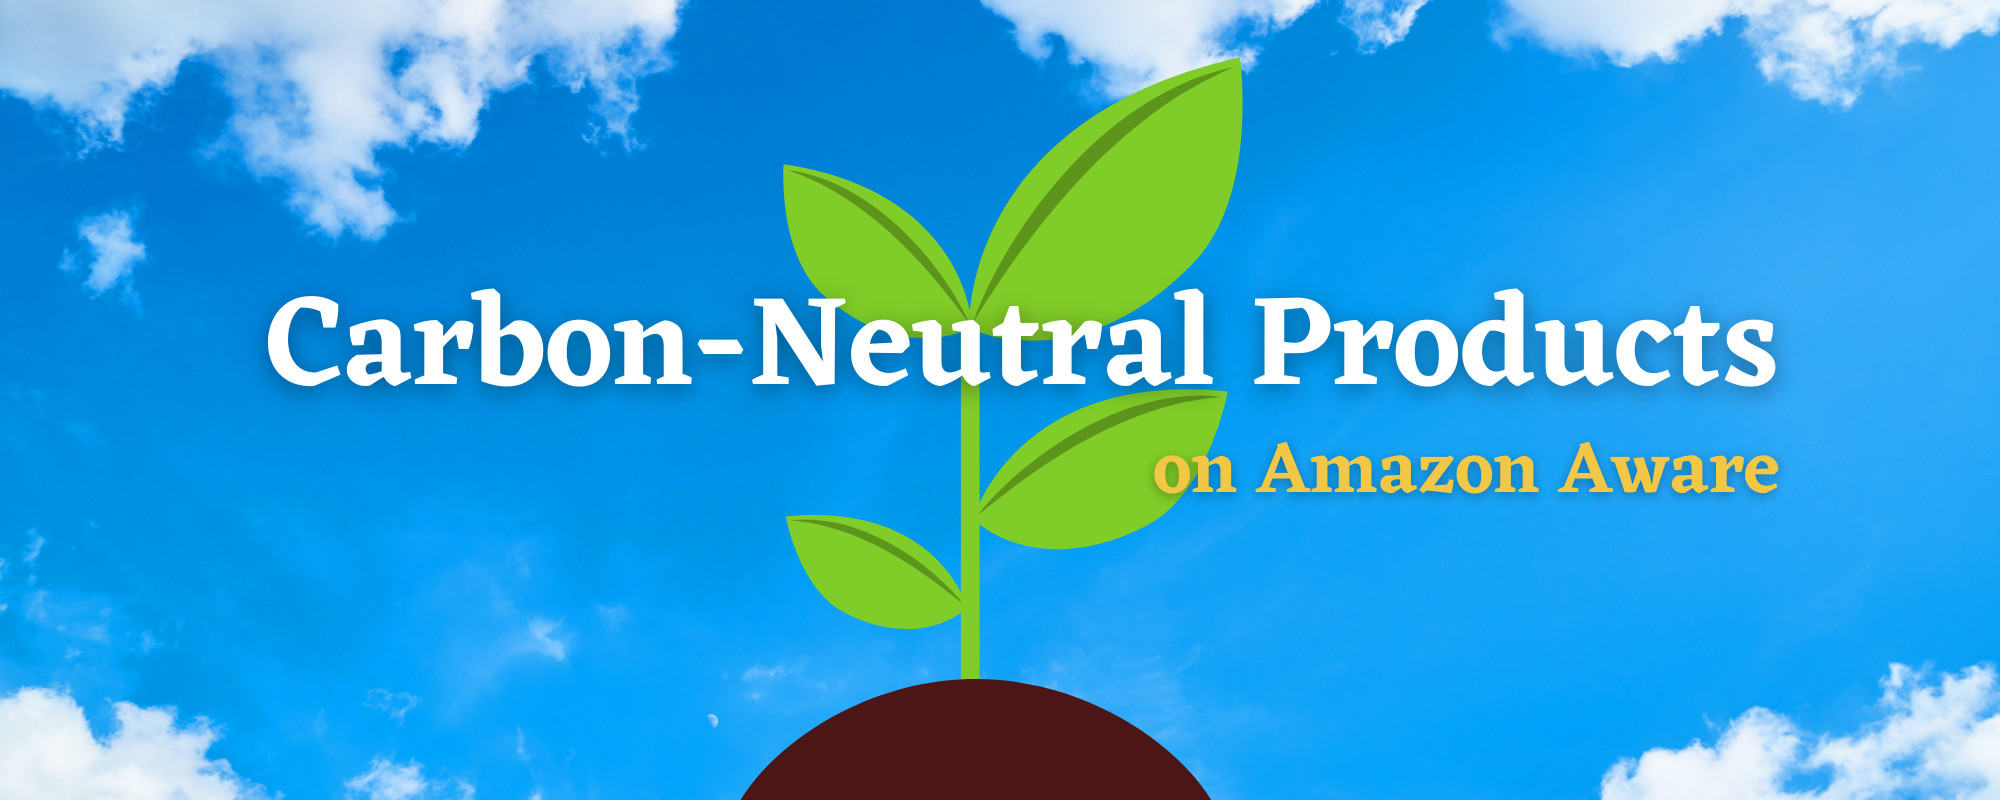 Carbon-Neutral Products on Amazon Aware